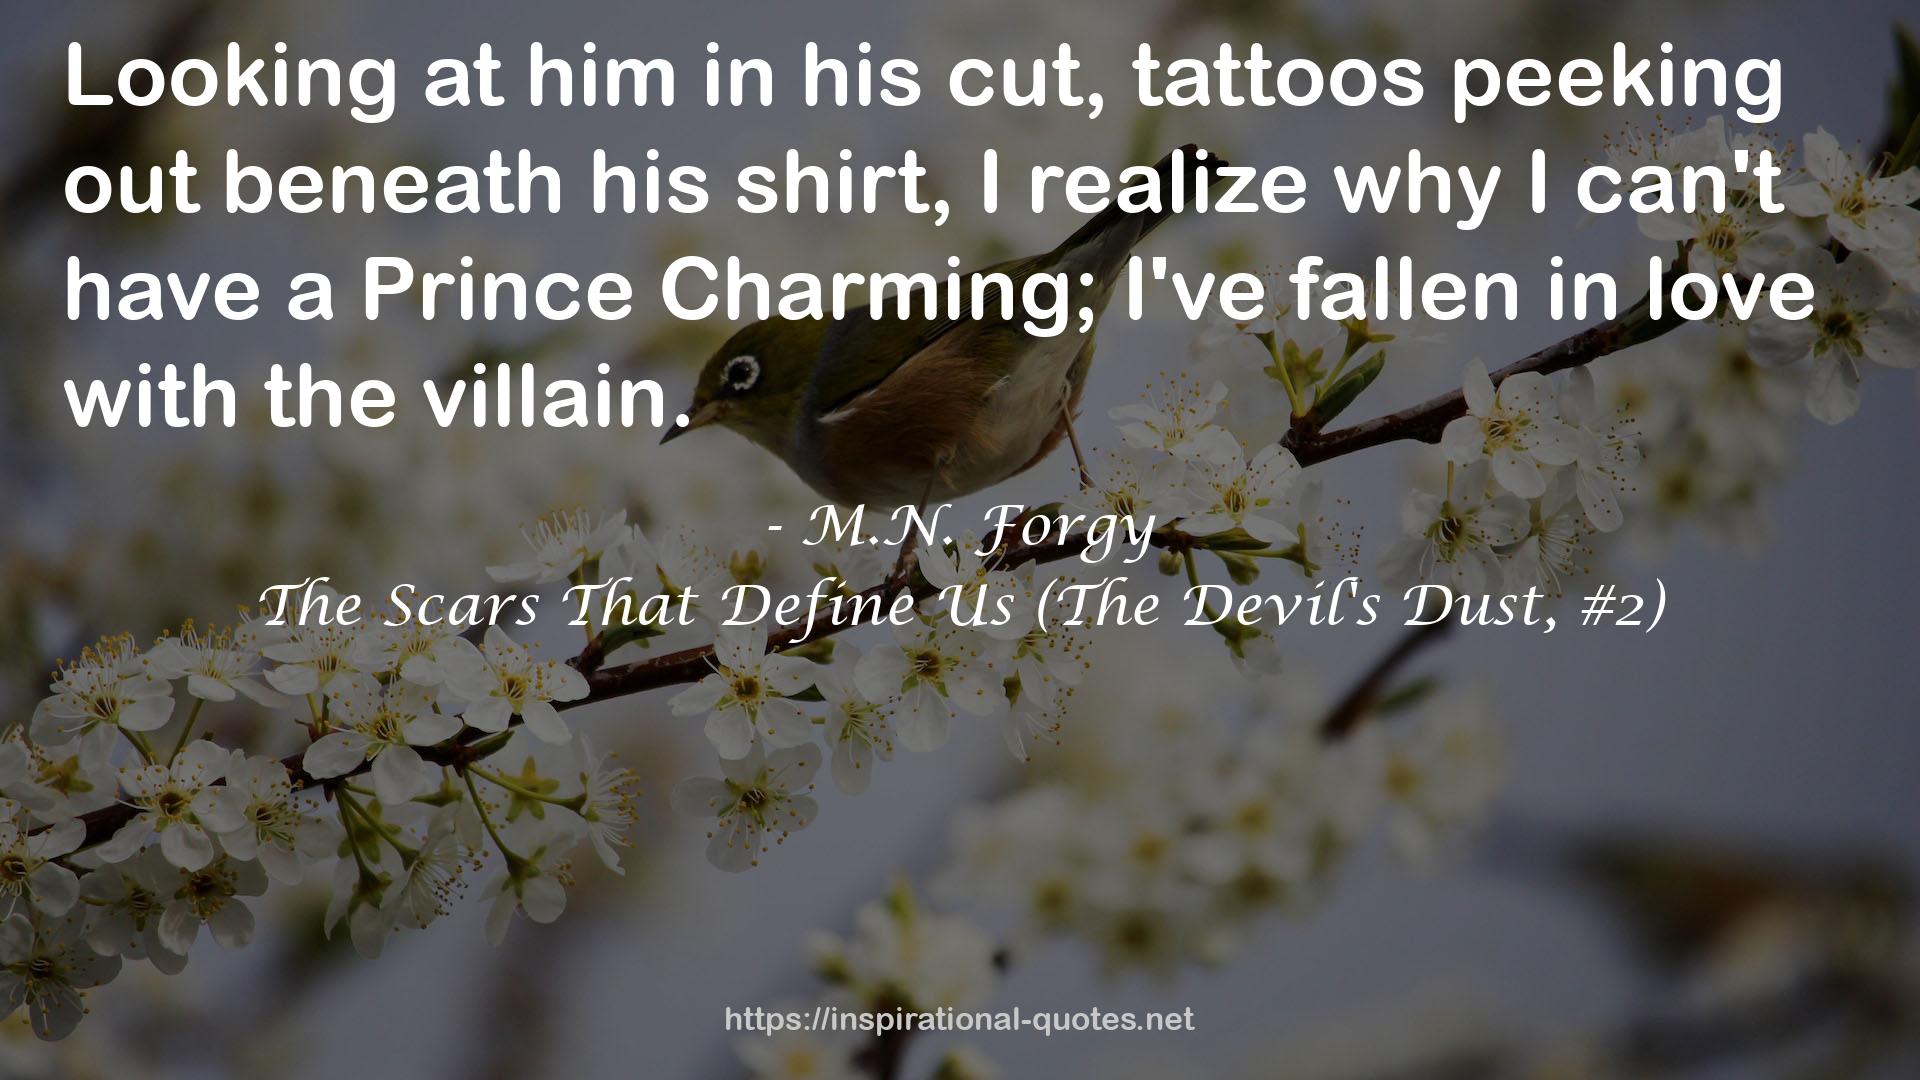 The Scars That Define Us (The Devil's Dust, #2) QUOTES